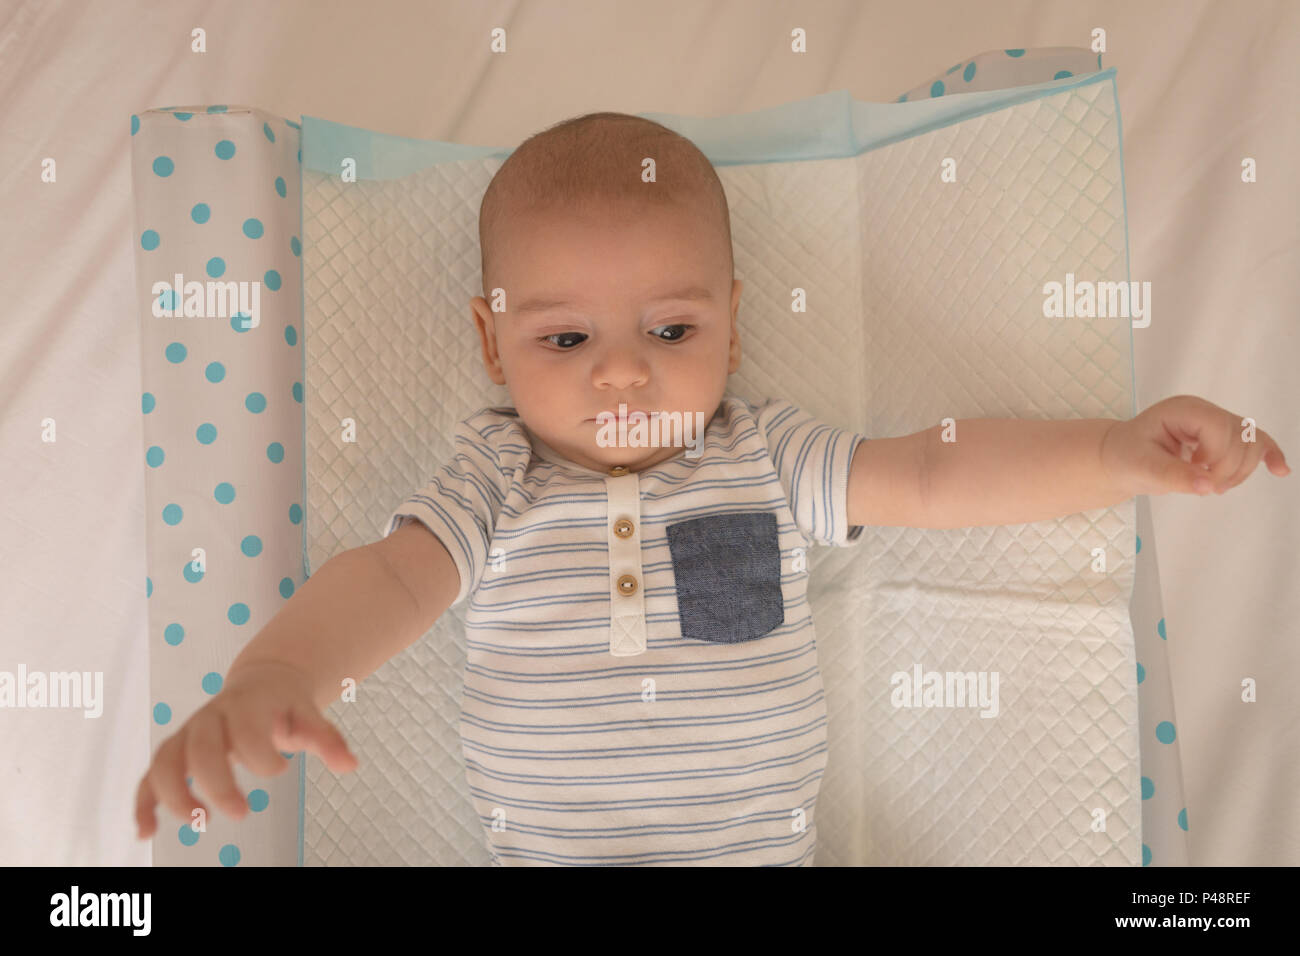 Cute little baby lying on bed Stock Photo